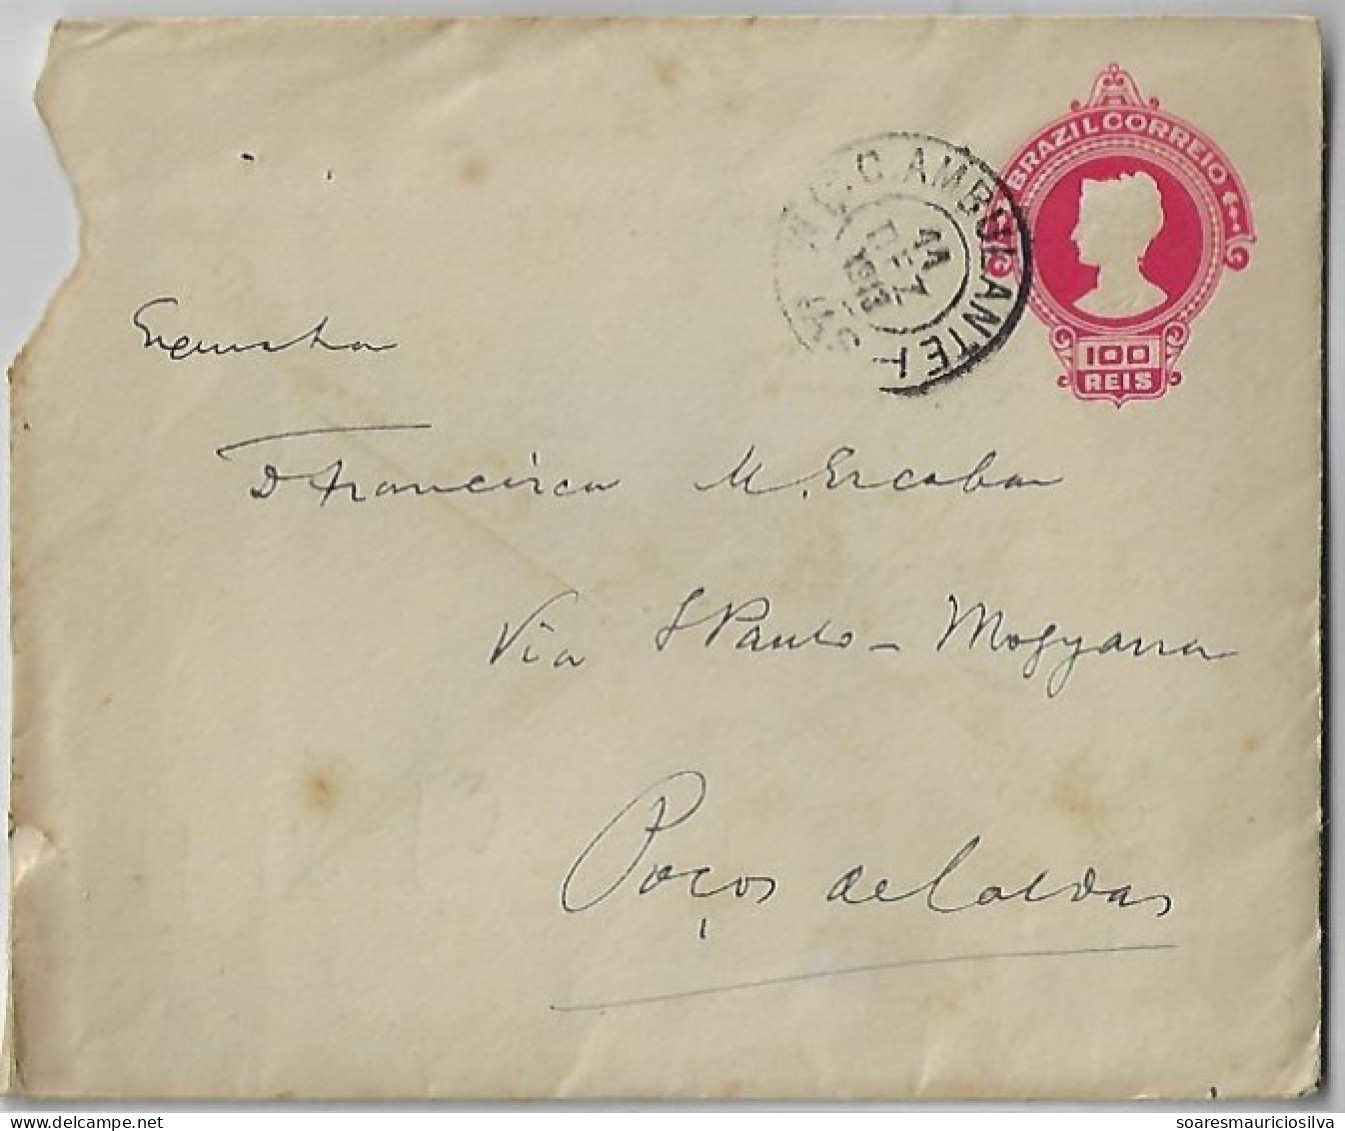 Brazil 1913 Postal Stationery Cover Sent By Traveling Courier To Mogiana Railway Co Station In Poços De Caldas Watermark - Lettres & Documents